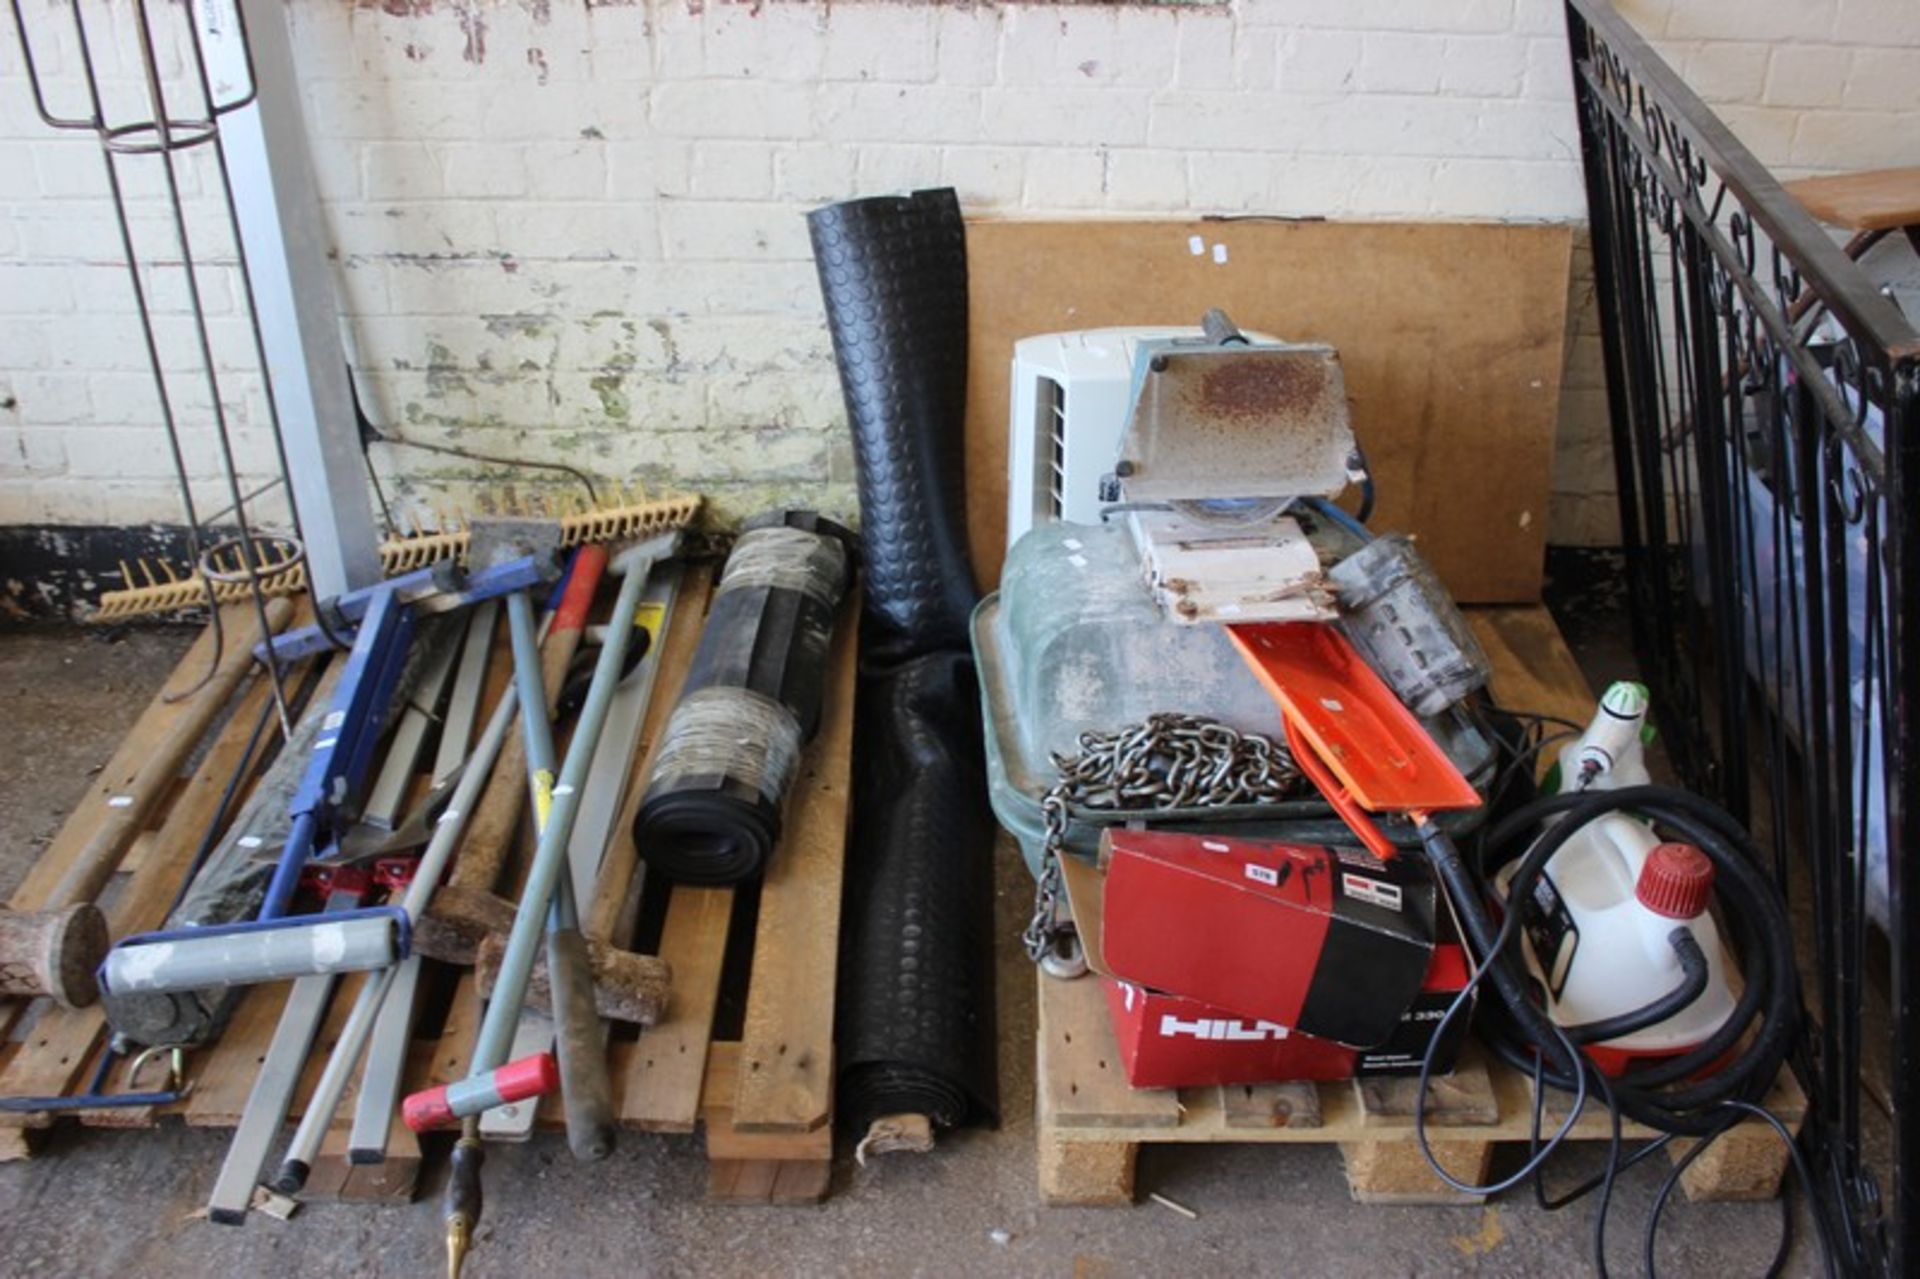 A Hilti HDM 330 manual dispenser, Black & Decker steamer, pasting table, assorted garden tools and